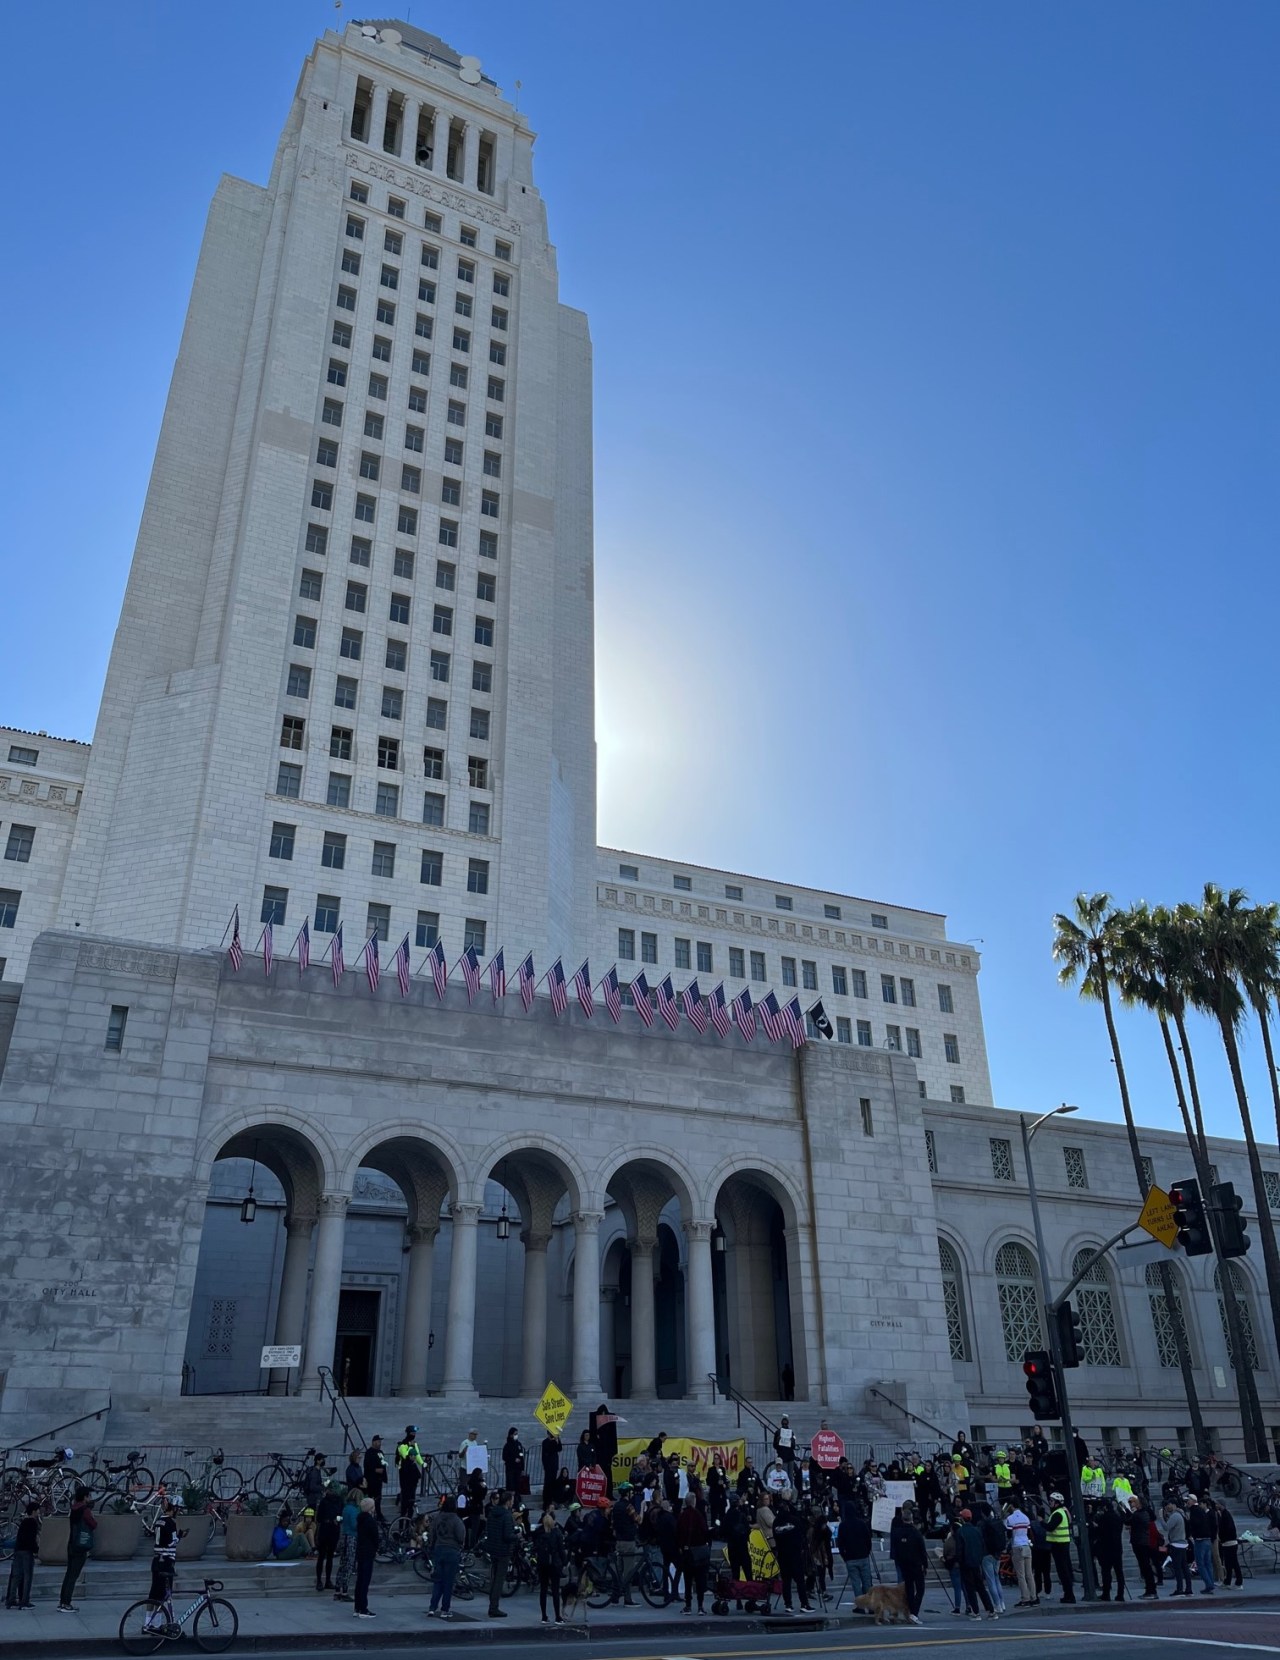 The die-in protest took place on the Spring Street steps to L.A. City Hall